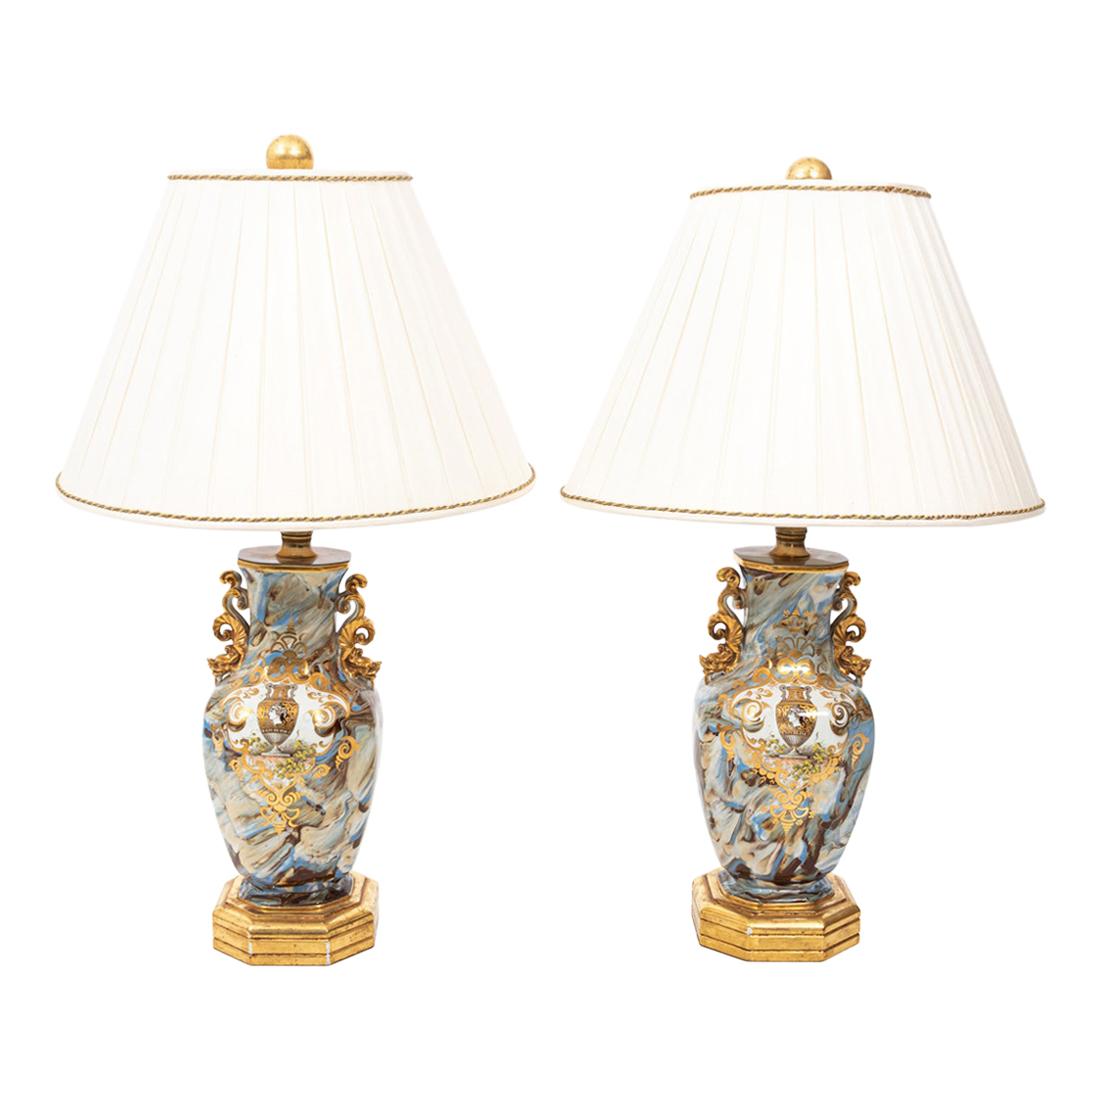 Pair of 19th Century French Porcelain Lamps